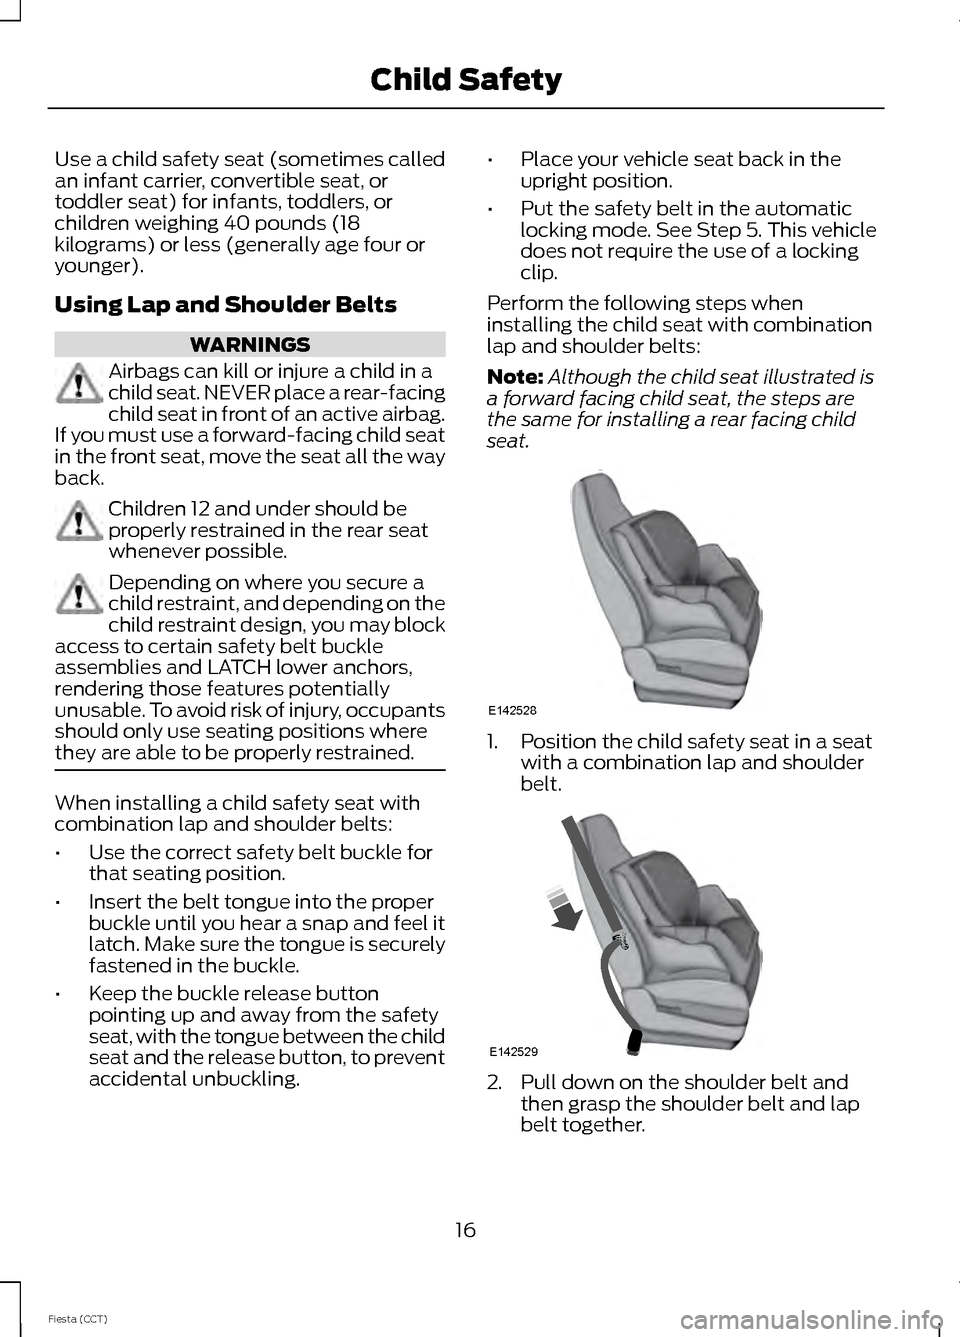 FORD FIESTA 2014 6.G User Guide Use a child safety seat (sometimes called
an infant carrier, convertible seat, or
toddler seat) for infants, toddlers, or
children weighing 40 pounds (18
kilograms) or less (generally age four or
youn